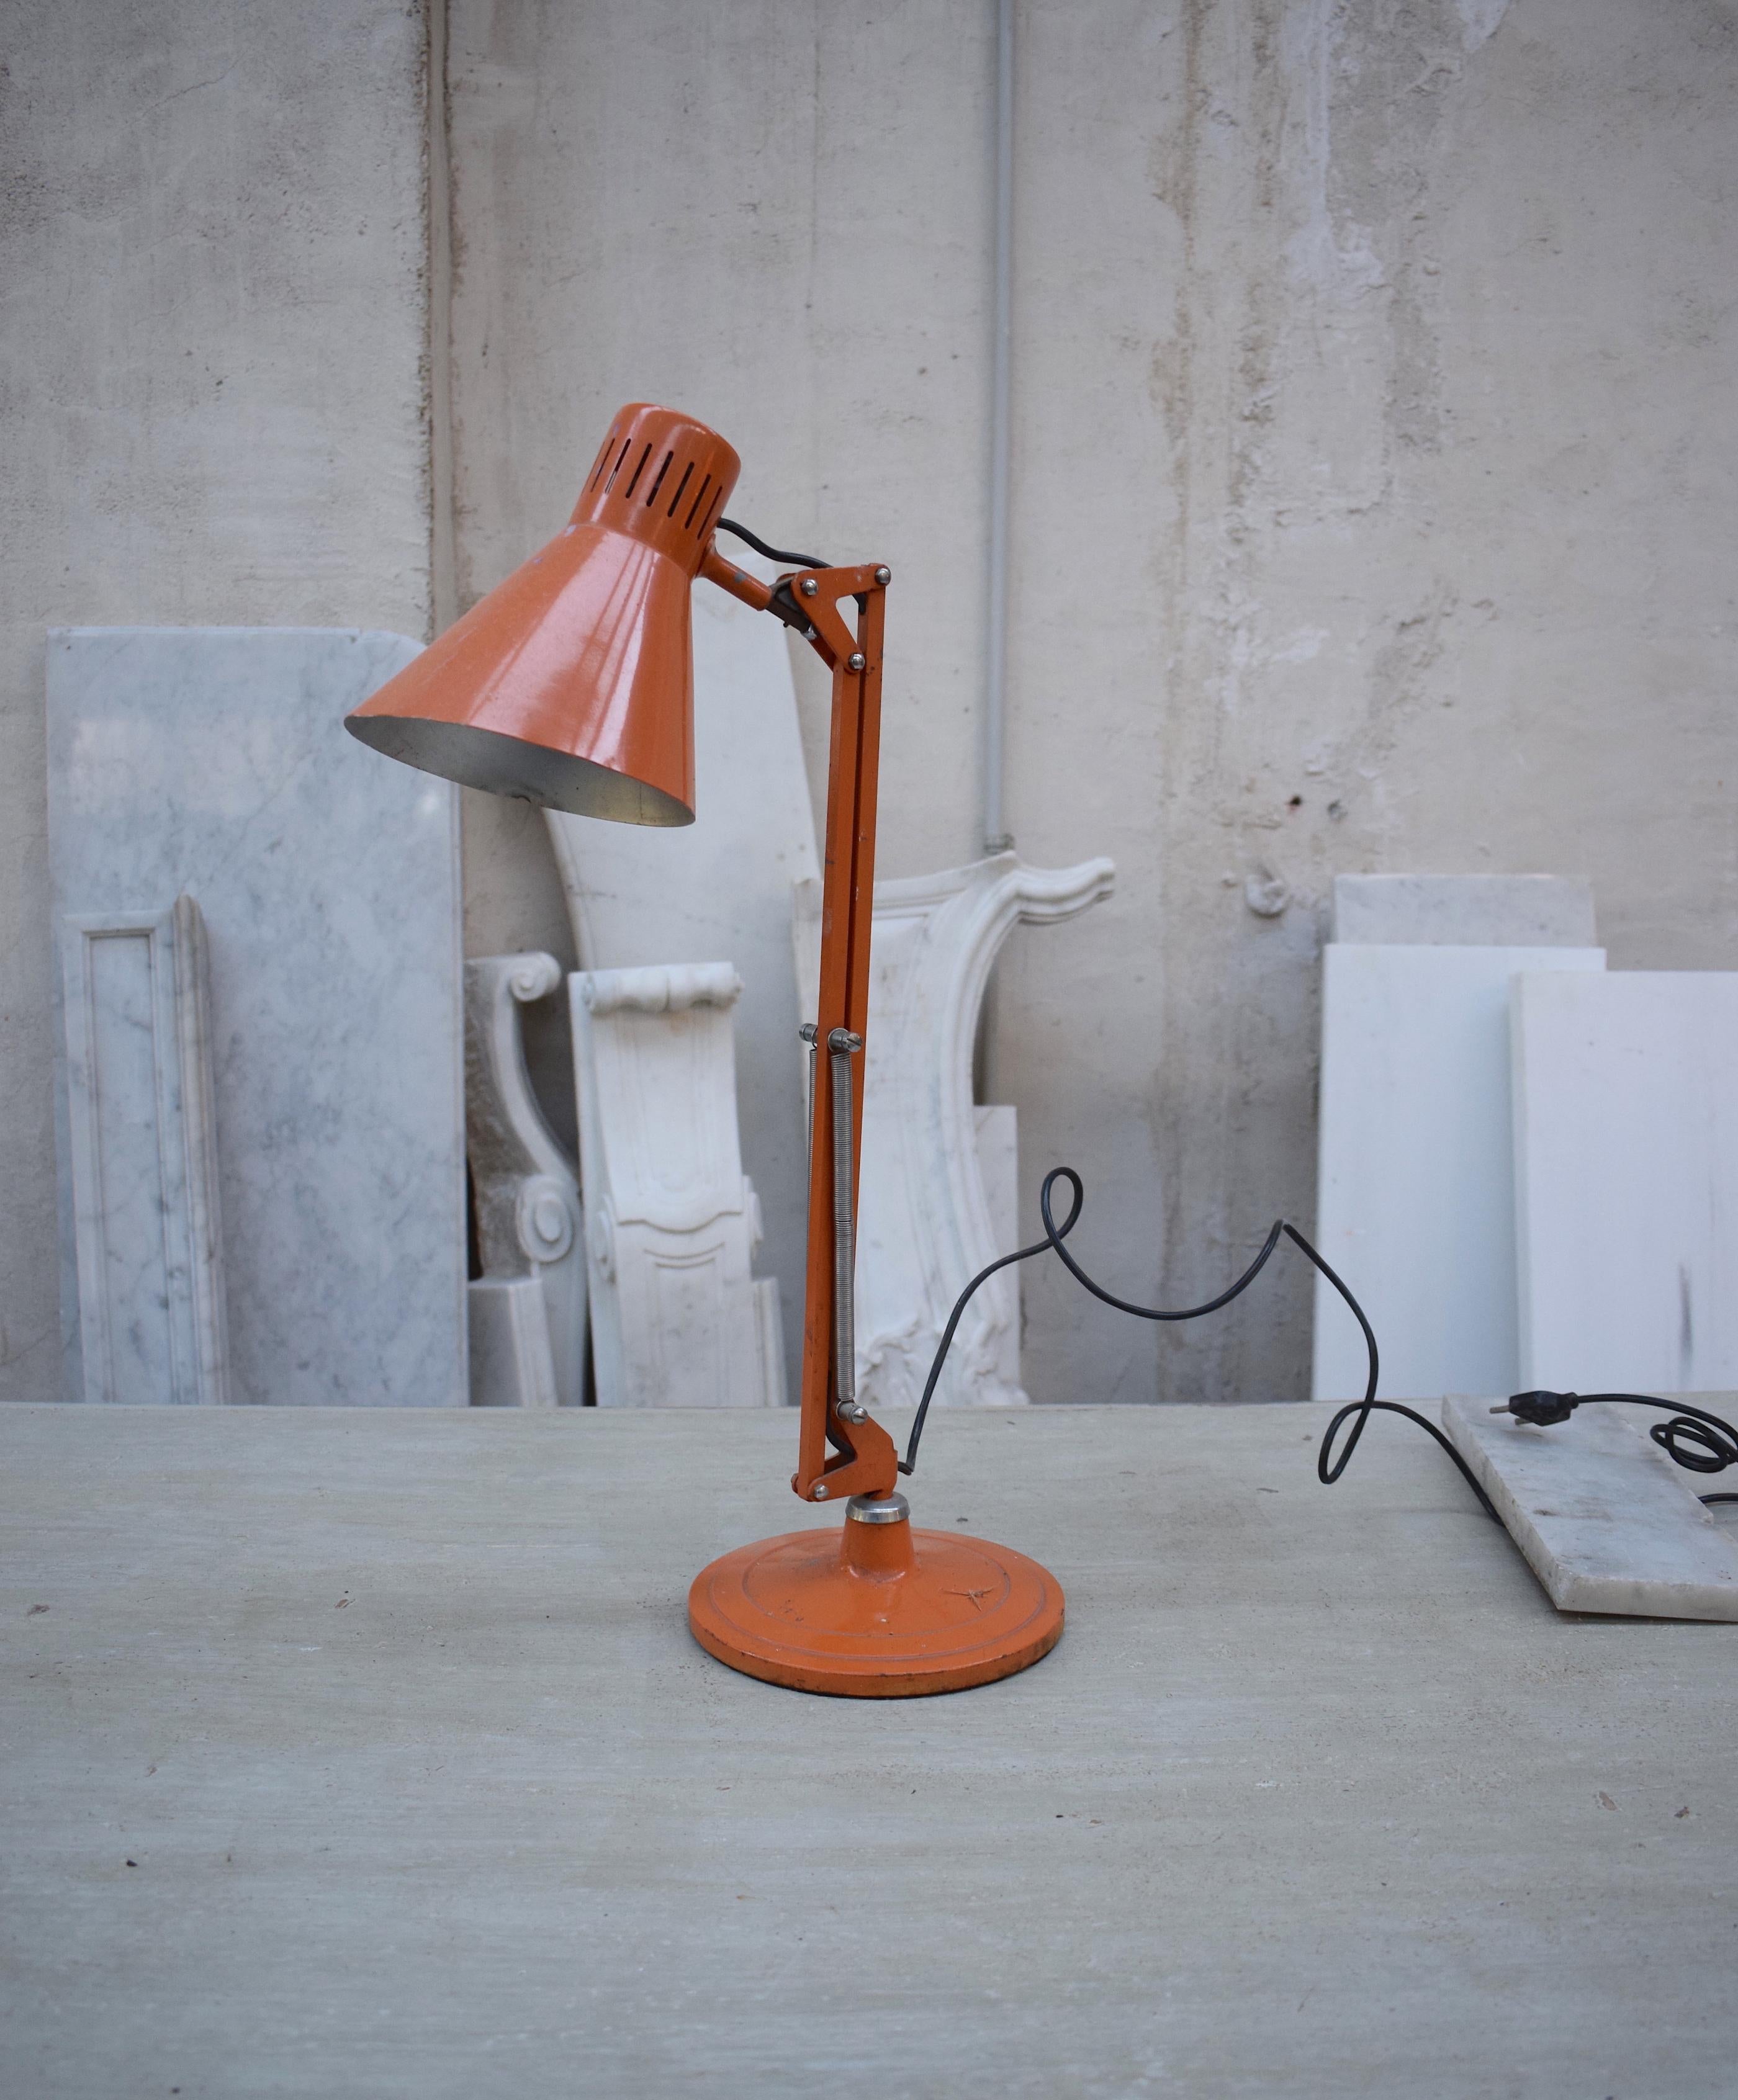 Vintage architect desk lamp this design style is also known as an anglepoise lamp. It was a very popular design among students, engineers and architects.